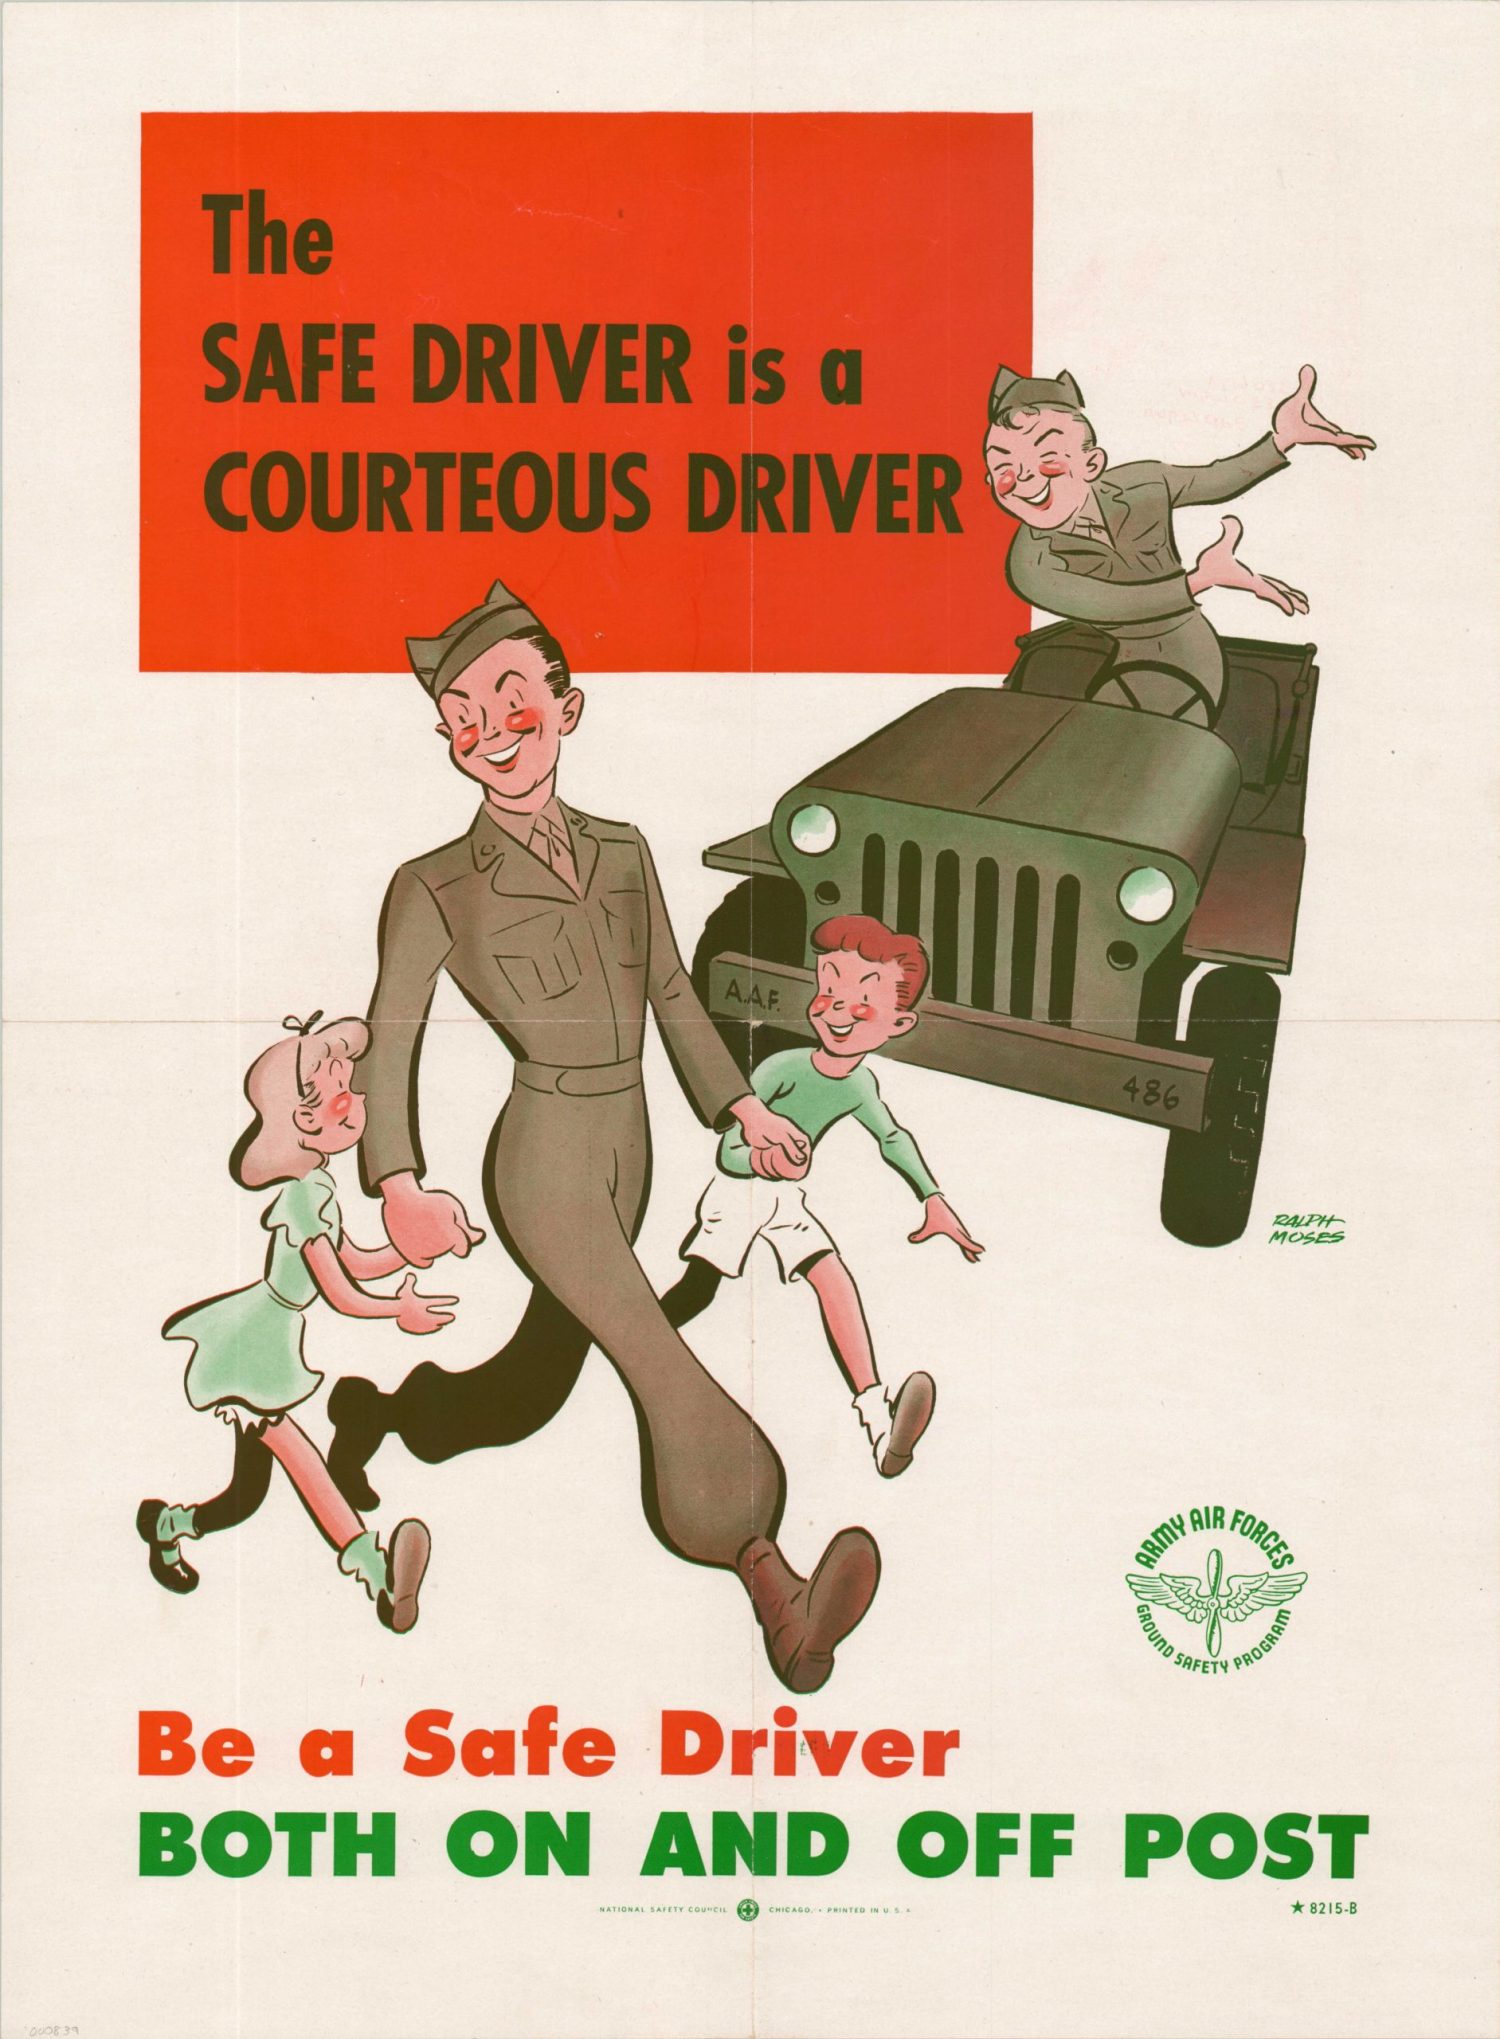 The Safe Driver is a Courteous Driver | Curtis Wright Maps